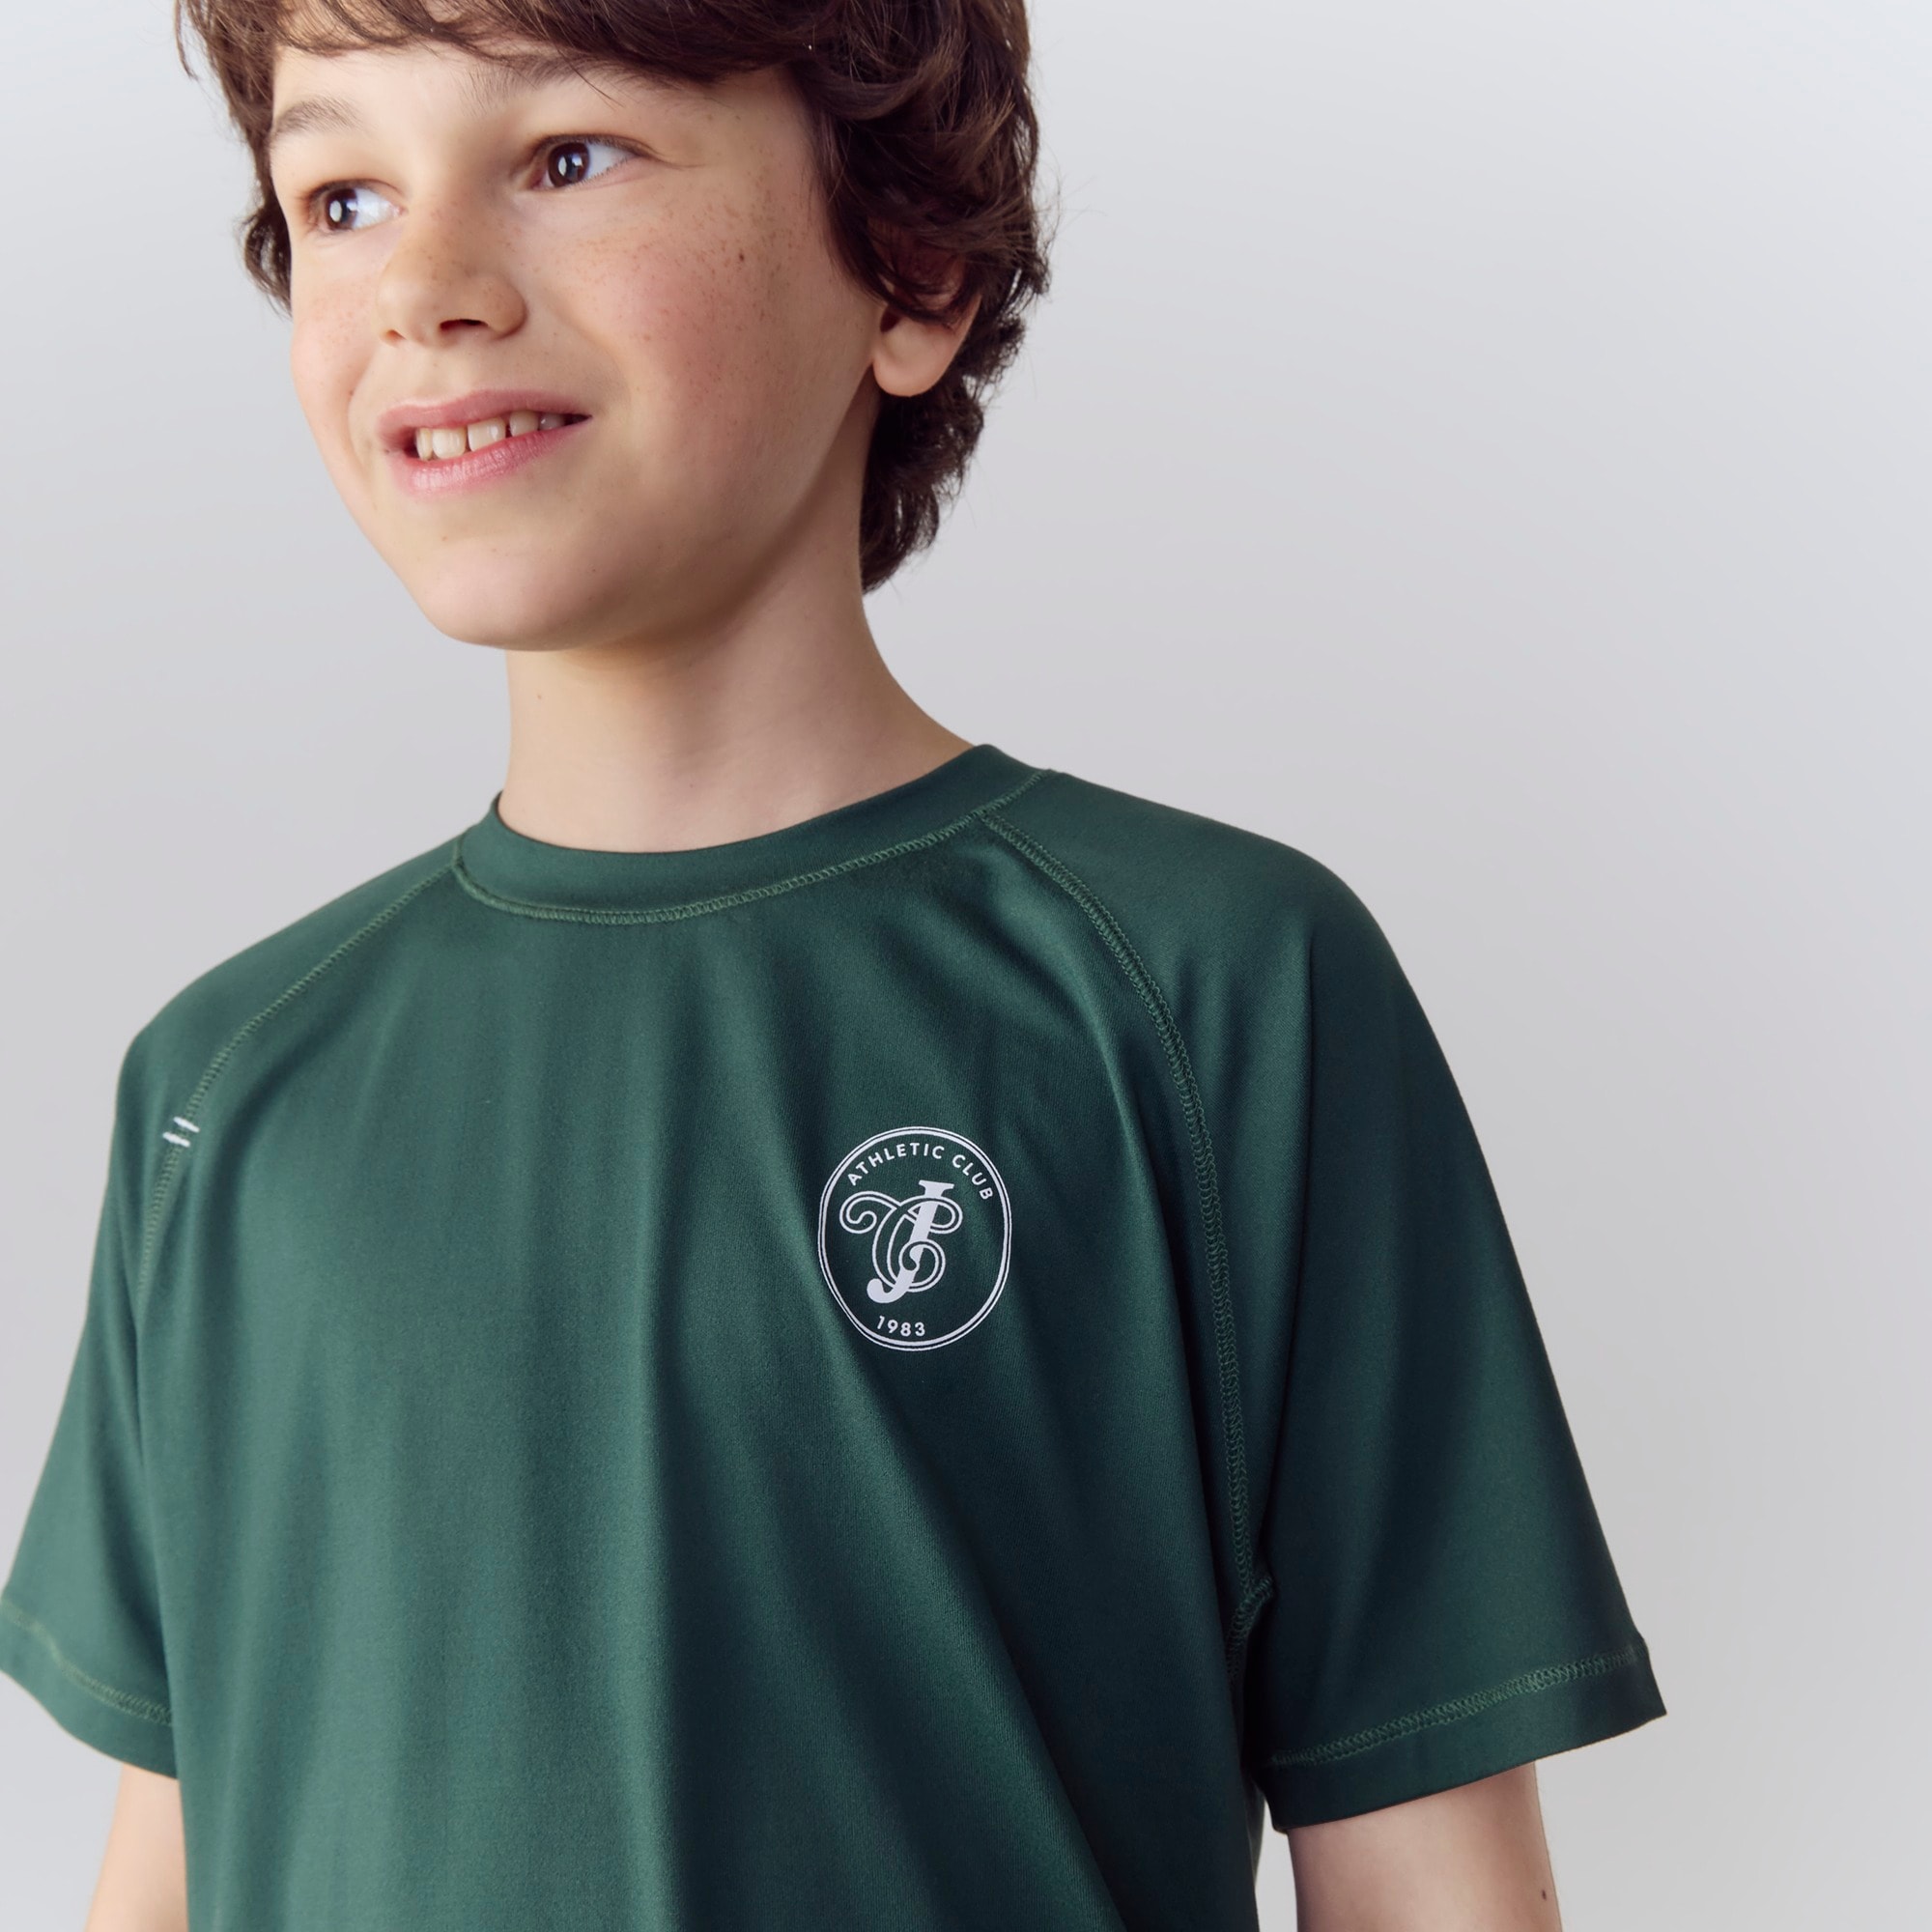  Kids' relaxed active graphic T-shirt